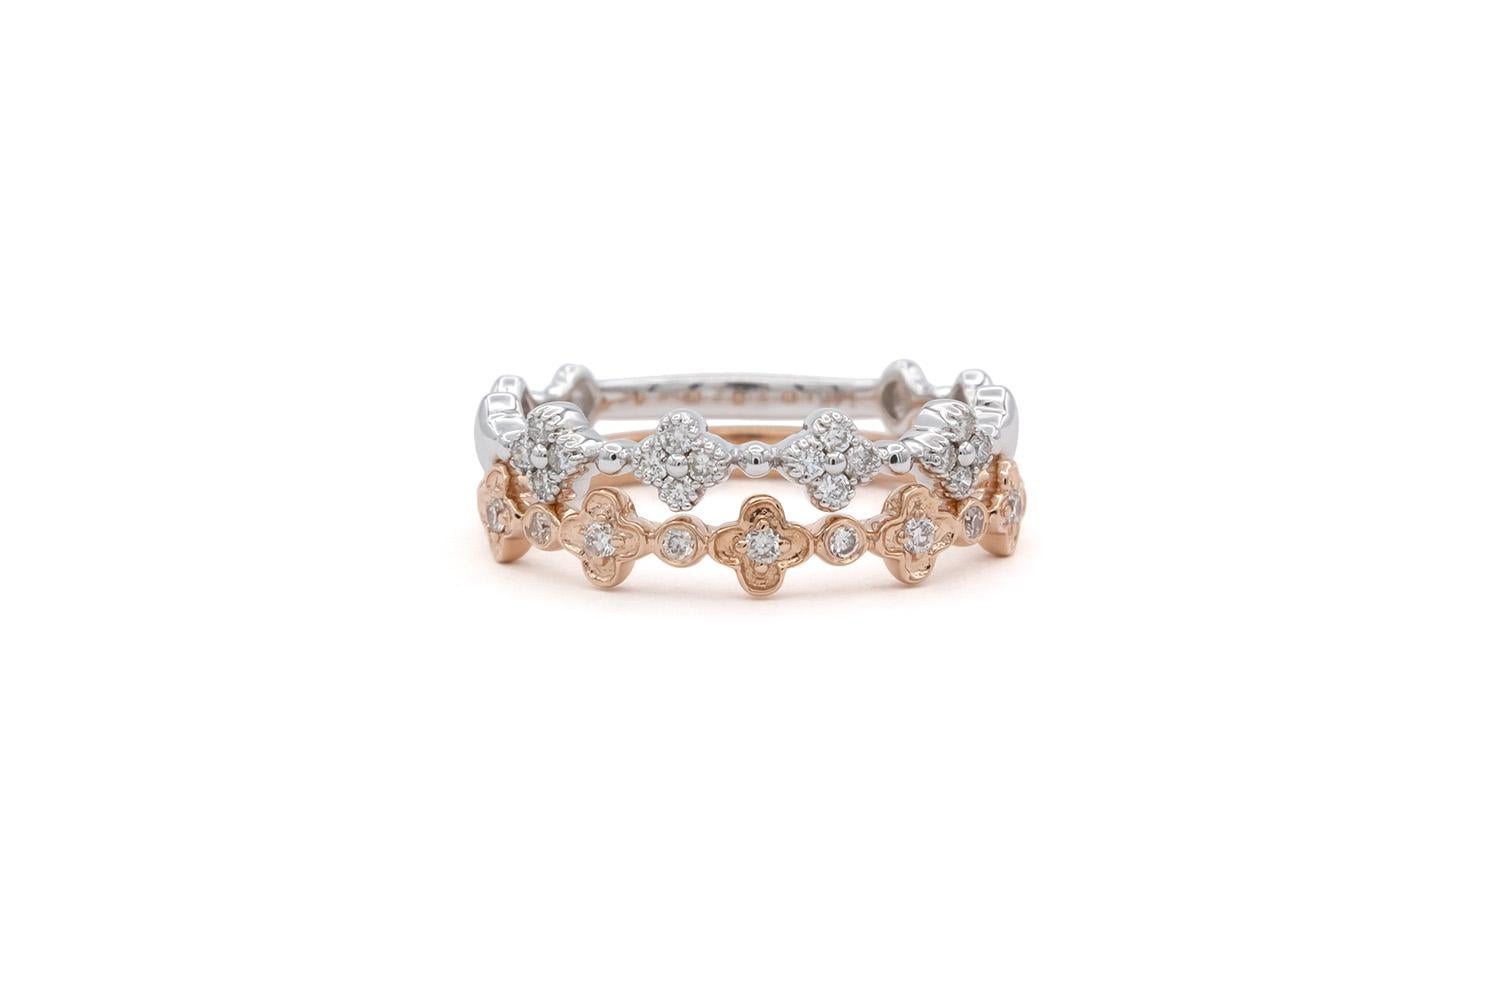 We are pleased to offer these Brand New 14k White & Rose Gold Diamond Alhambra Stacking Fashion Rings. They feature 0.22ctw G/VS Round brilliant Cut Diamonds set in 14k gold. They are size 6.5 US and measures 3.60mm wide above the finger and 2.00mm